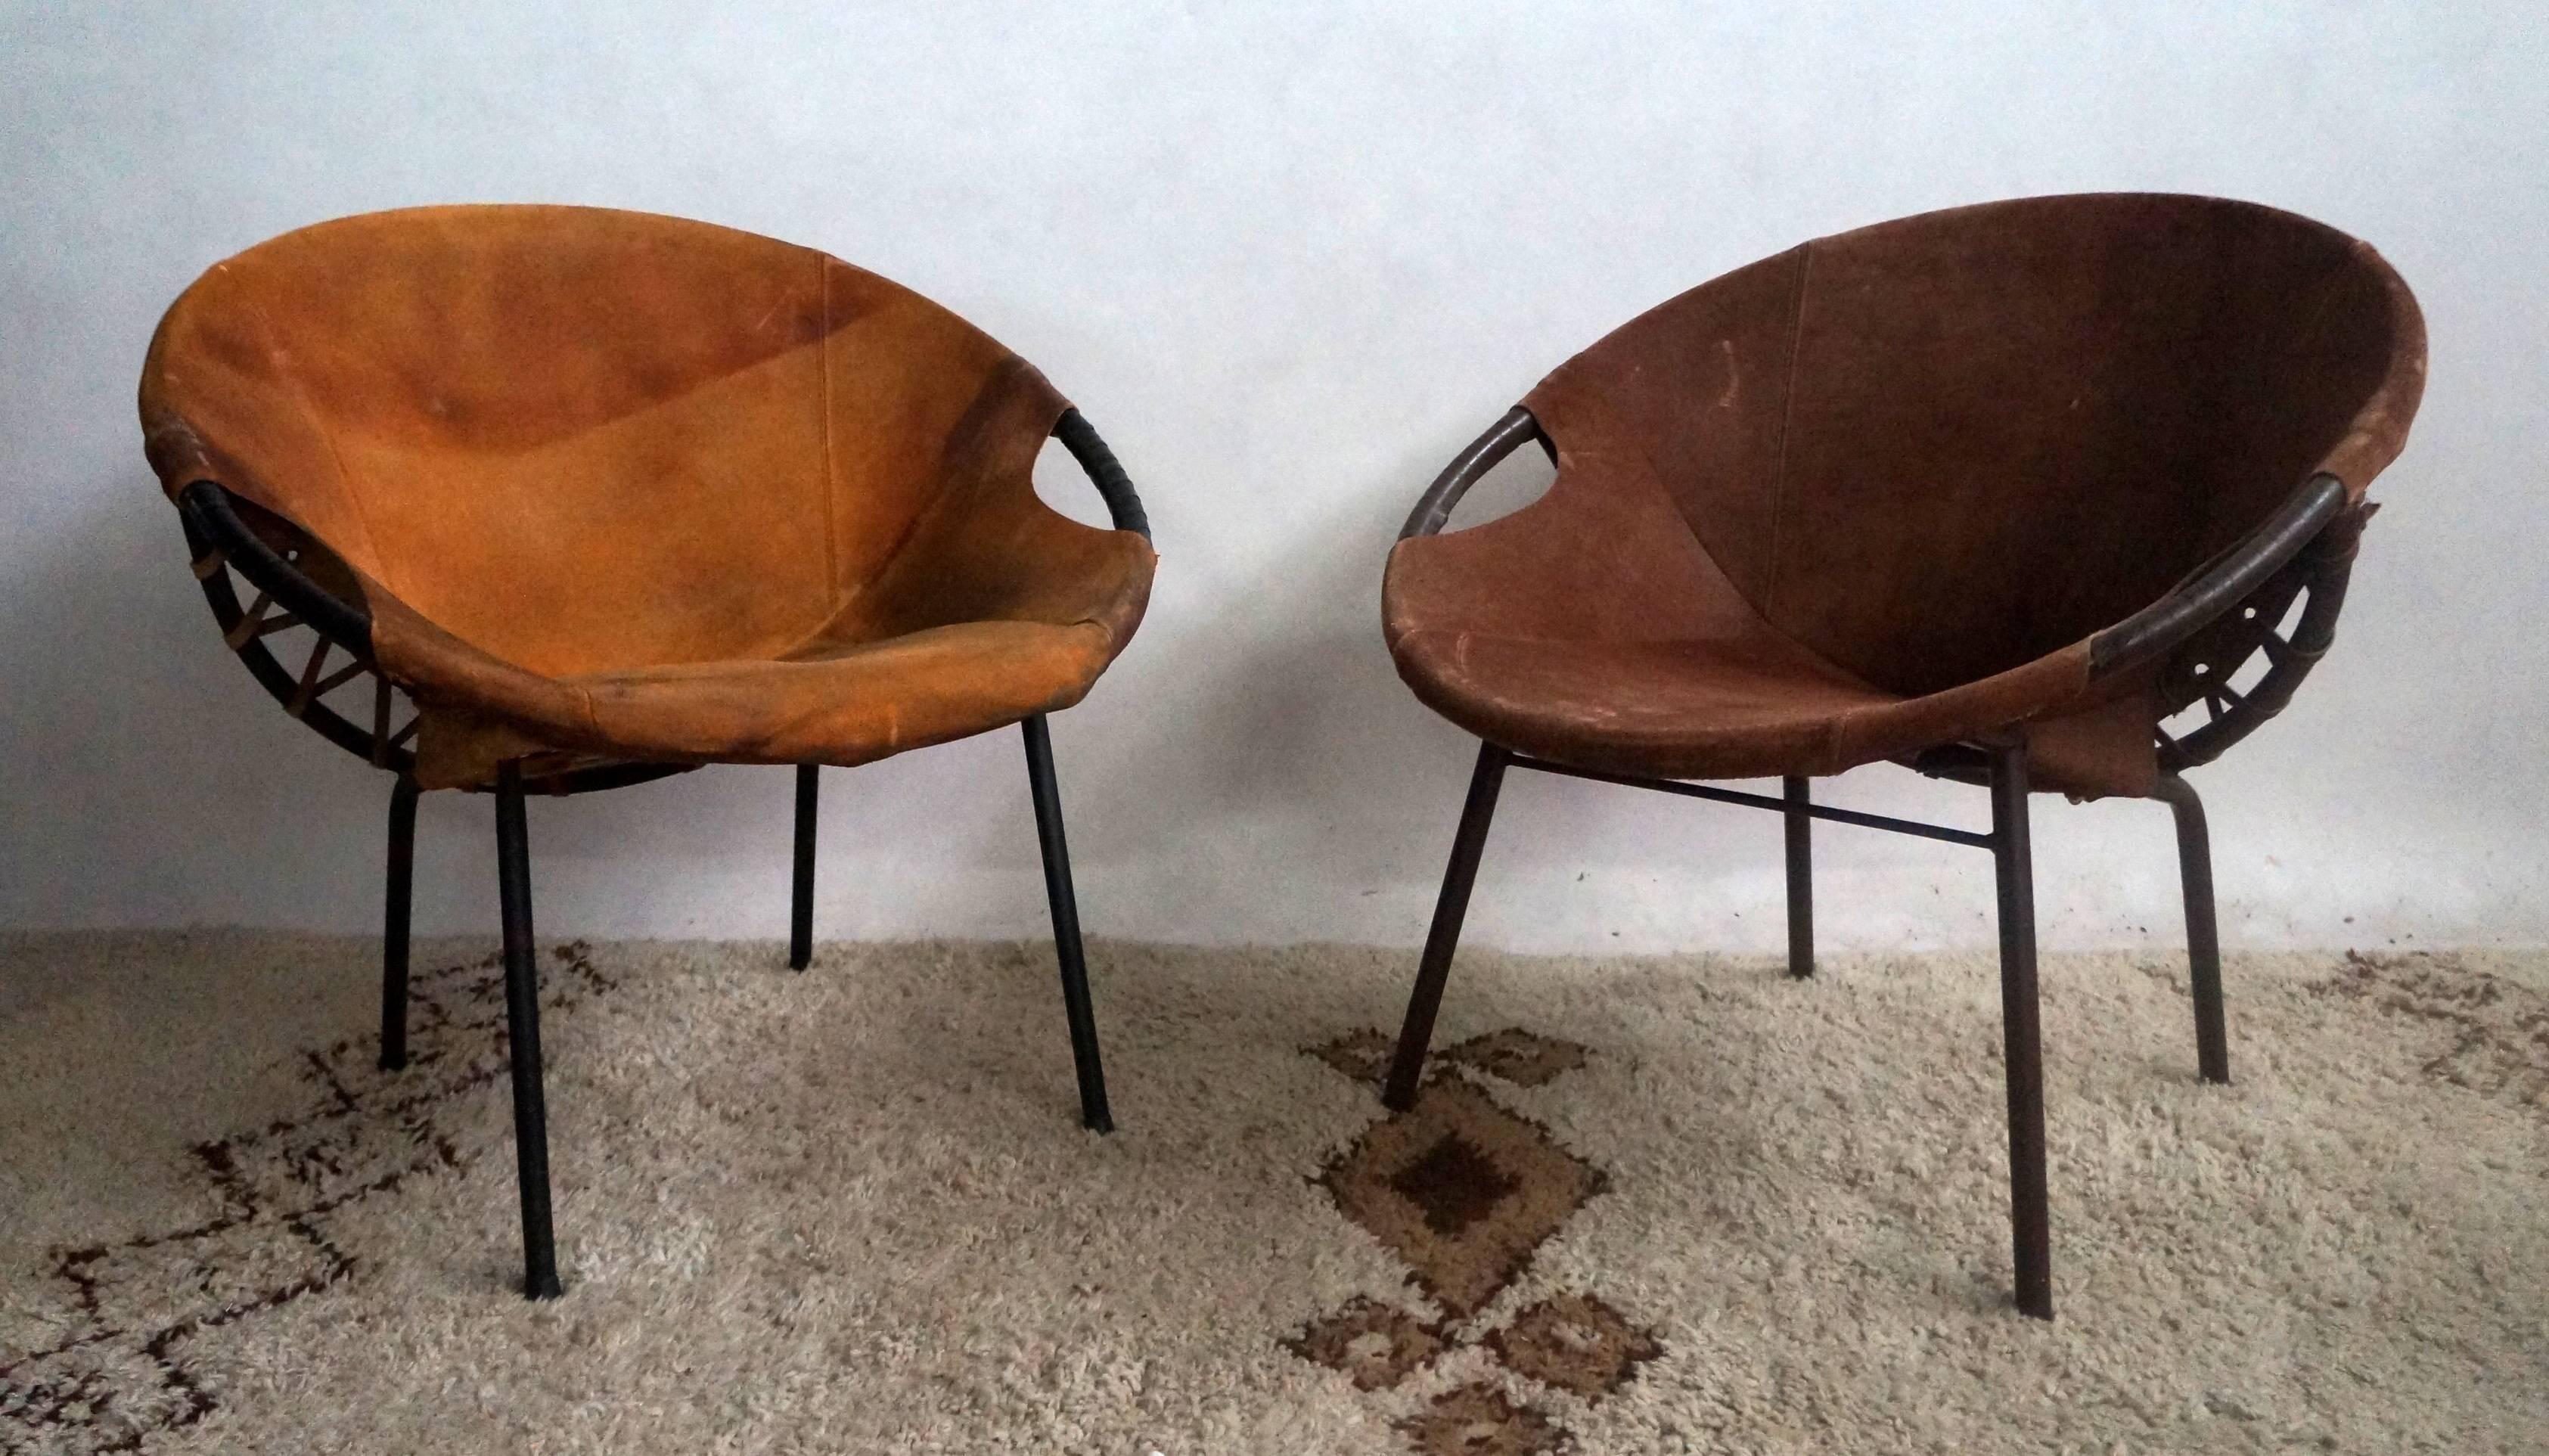 One pair of camel and one single chocolate chairs
Original condition, leather would need cleaning.